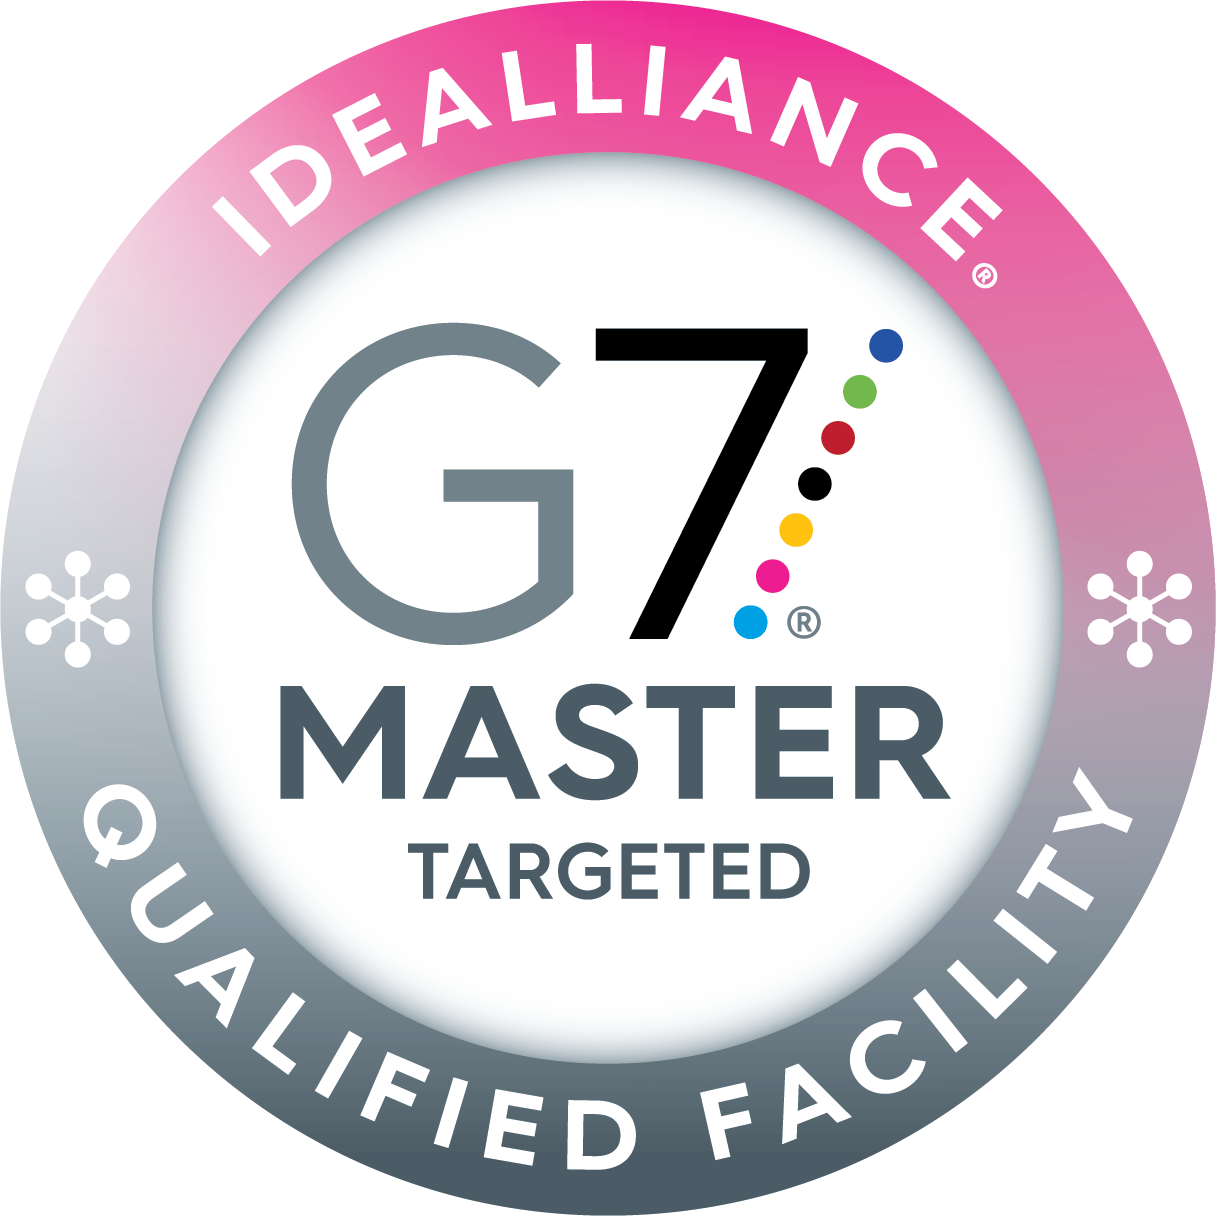 idealliance_certbadge_G7mastertargeted_qf